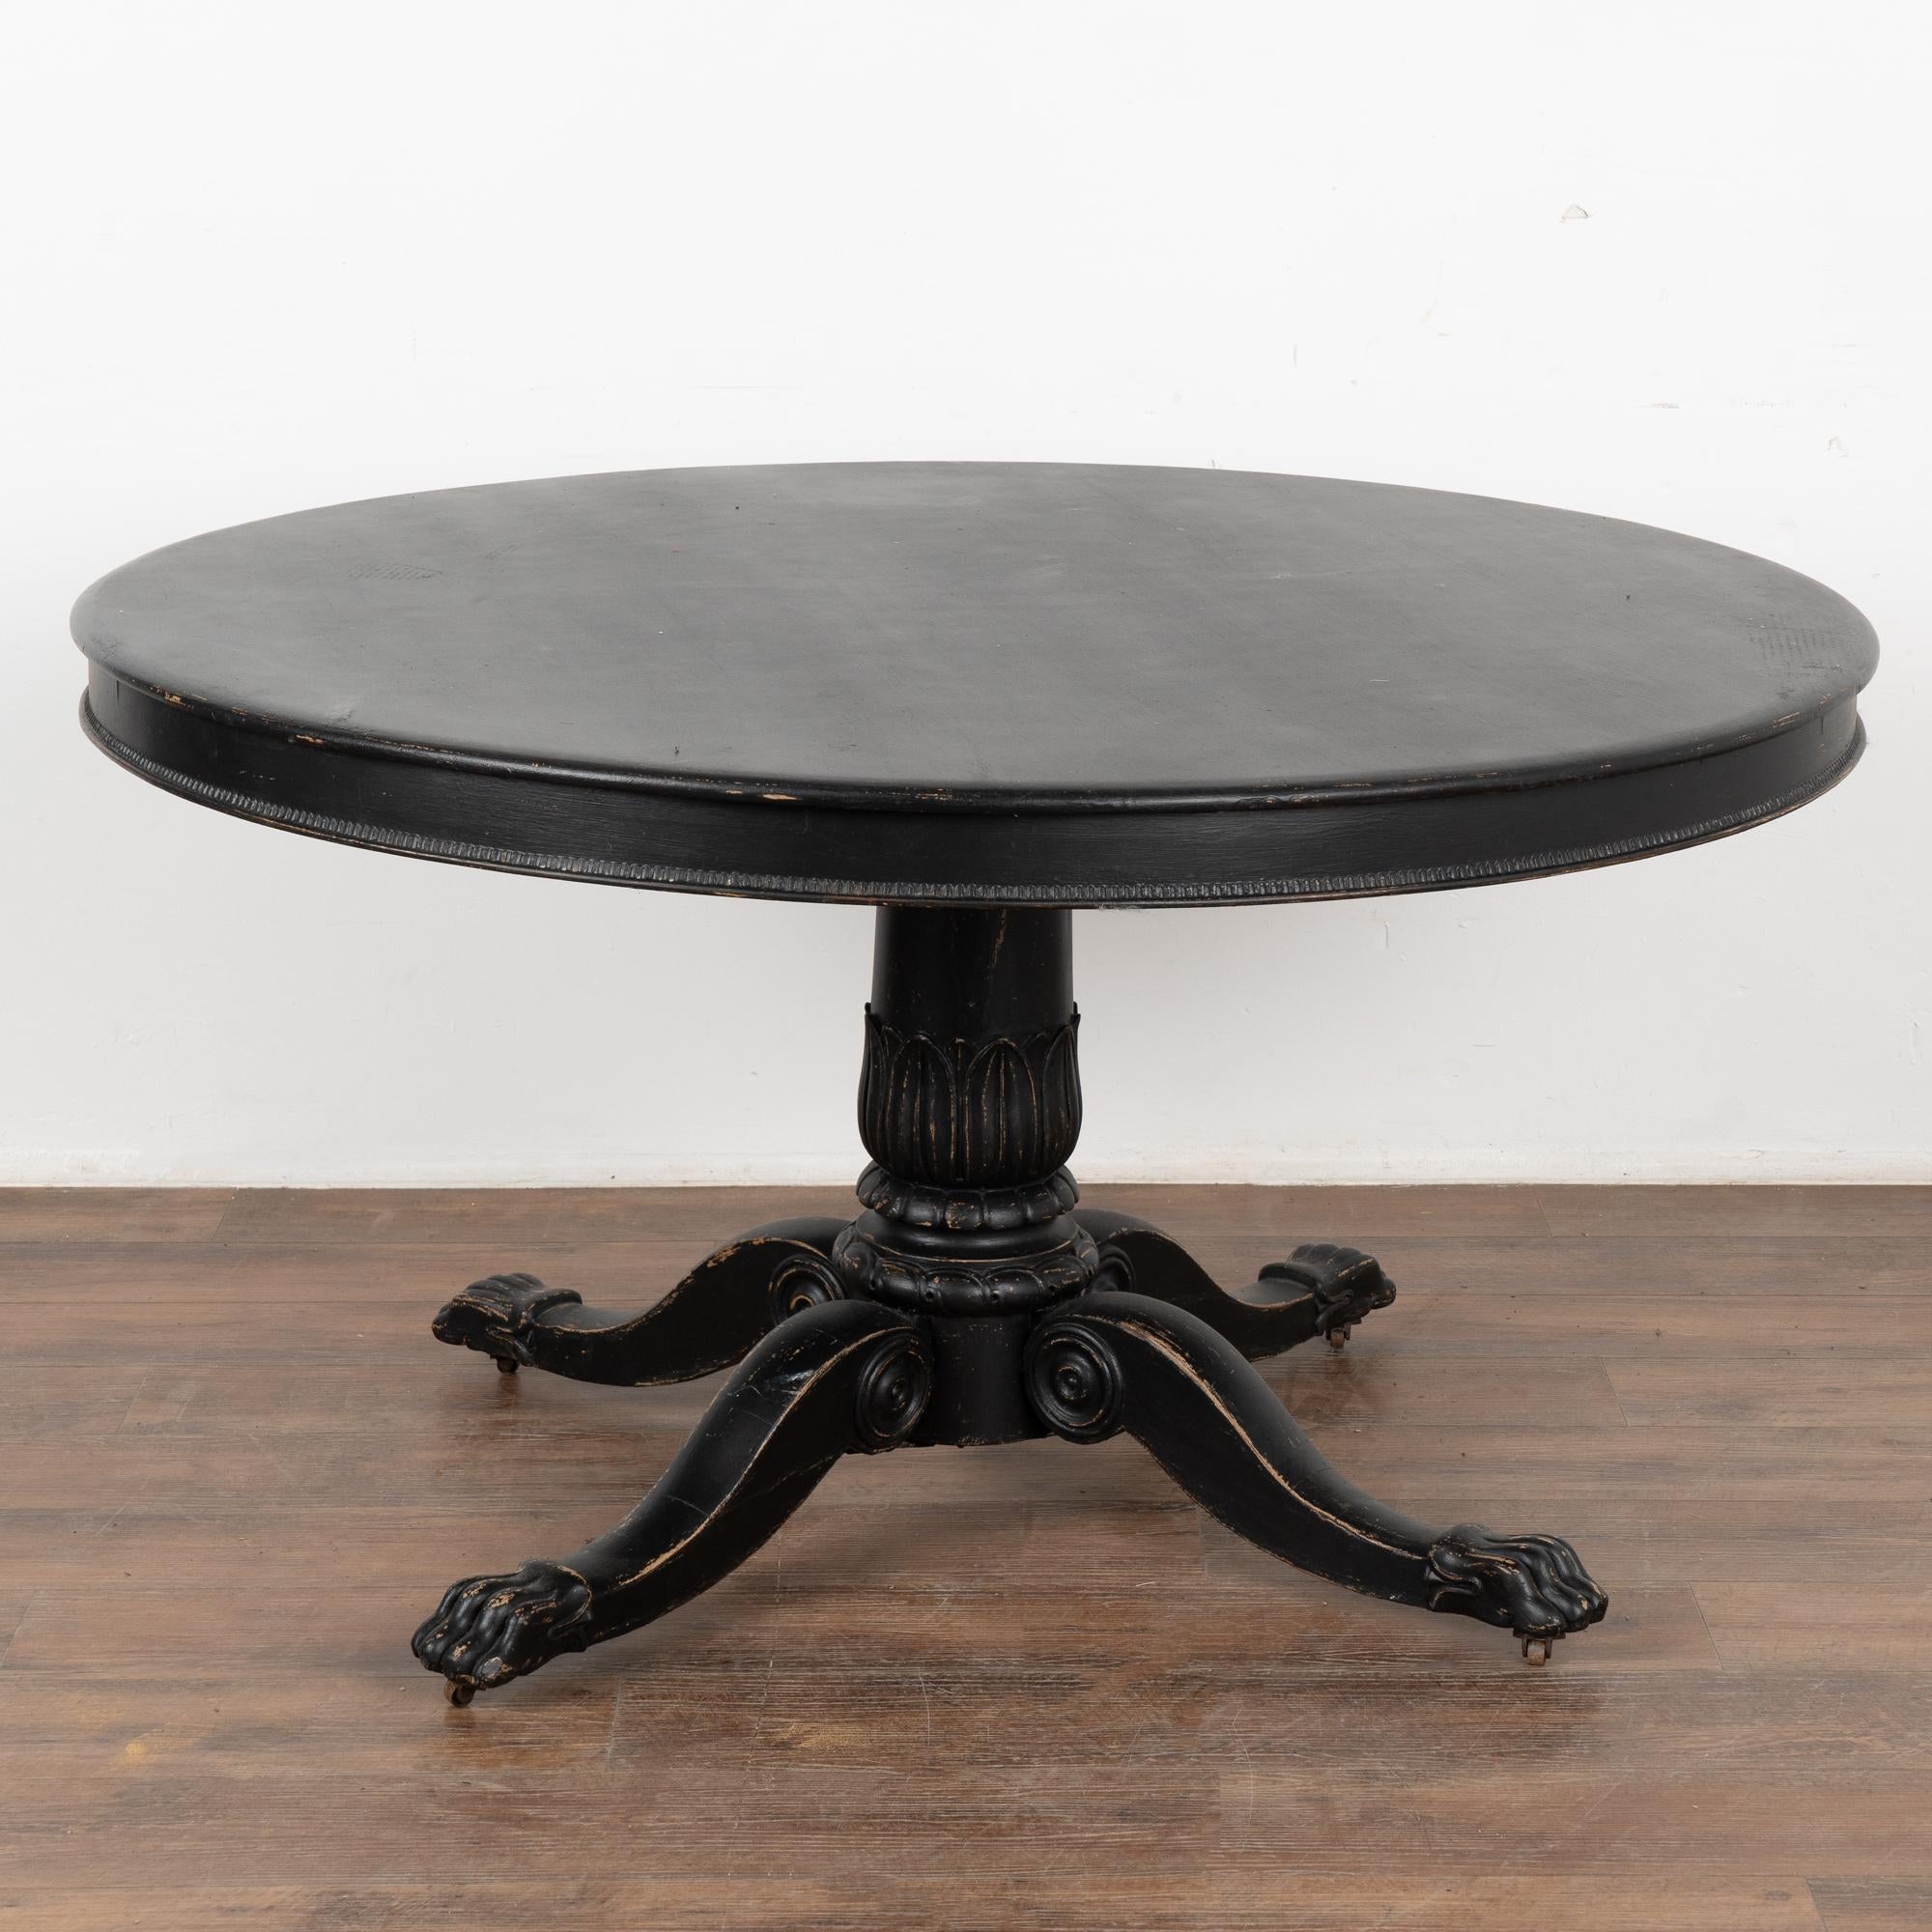 This round pine pedestal table has a carved skirt, turned pedestal base resting on four carved legs with lion's paw feet and casters.
Restored, later professionally painted in black and lightly distressed to fit the age and grace of this striking